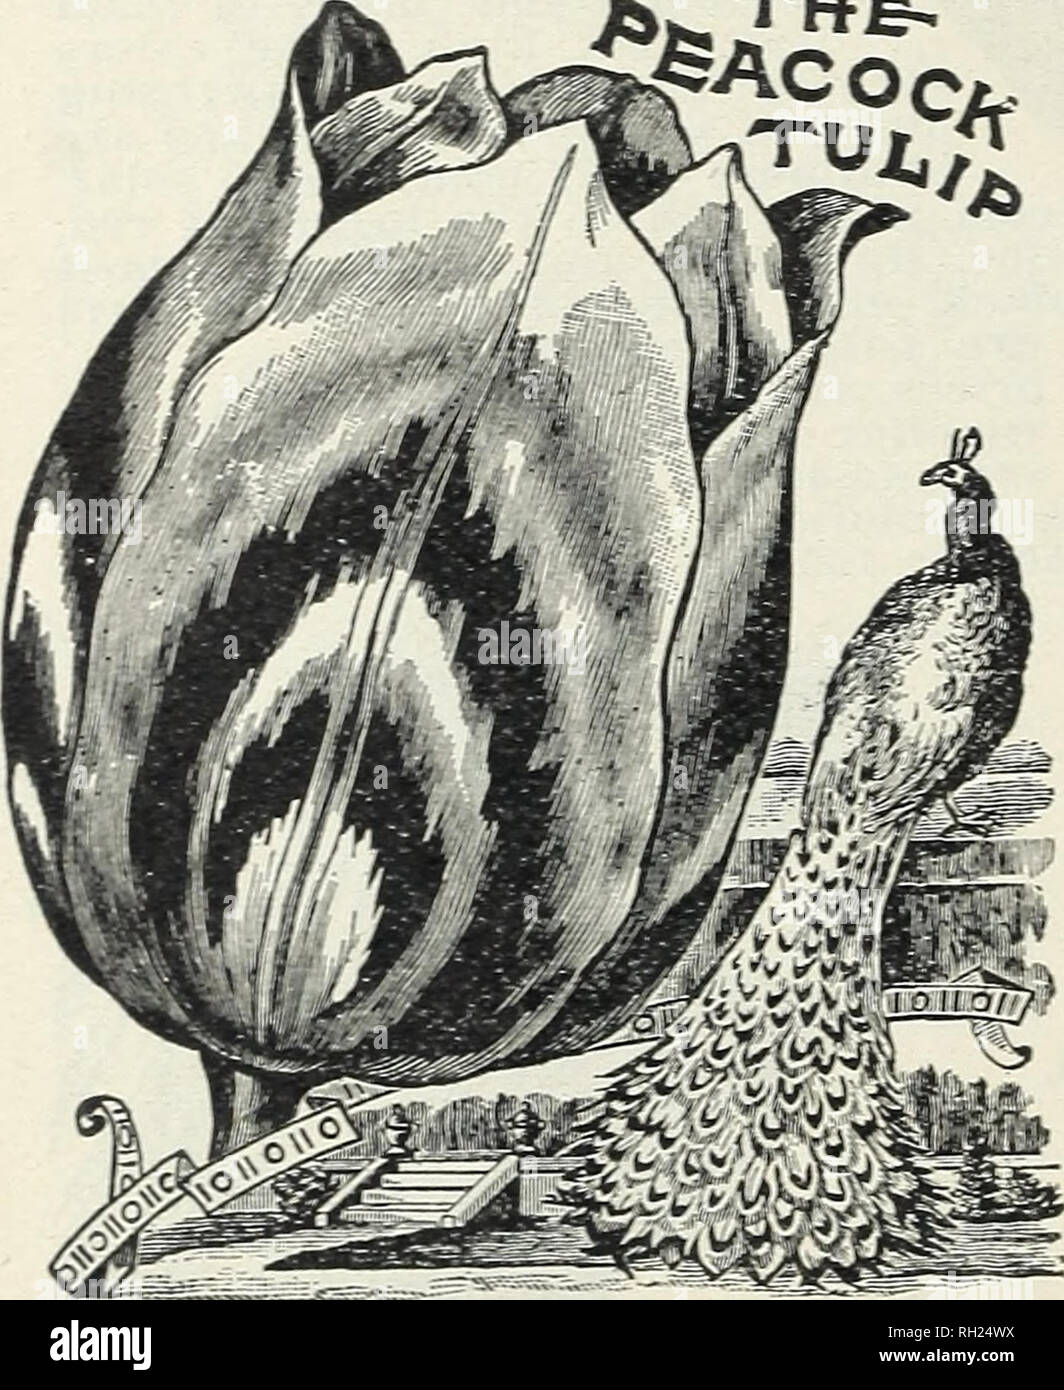 . Bulbs and plants : autumn 1904. Flowers Seeds Catalogs; Bulbs (Plants) Seeds Catalogs; Vegetables Seeds Catalogs; Nurseries (Horticulture) Catalogs; Plants, Ornamental Catalogs; Gardening Equipment and supplies Catalogs. ROUND BED OF SINGLE EARLY TULIPS. 5 Feet in Diameter, requir- ing- 120 bulbs planted 5 inches apart. Scarlet and yellow . .$2 25 Scarlet and white ..... 1 90 6 Feet in Diameter, requir- ing 170 bulbs planted 5 inches apart. Scarlet and yellow . .$3 25 Scarlet and white ... 2 75 ROUND BED DOUBLE EARLY TULIPS. 5 Feet in Diameter, requiring 120 bulbs planted 5 inches apart. Sca Stock Photo